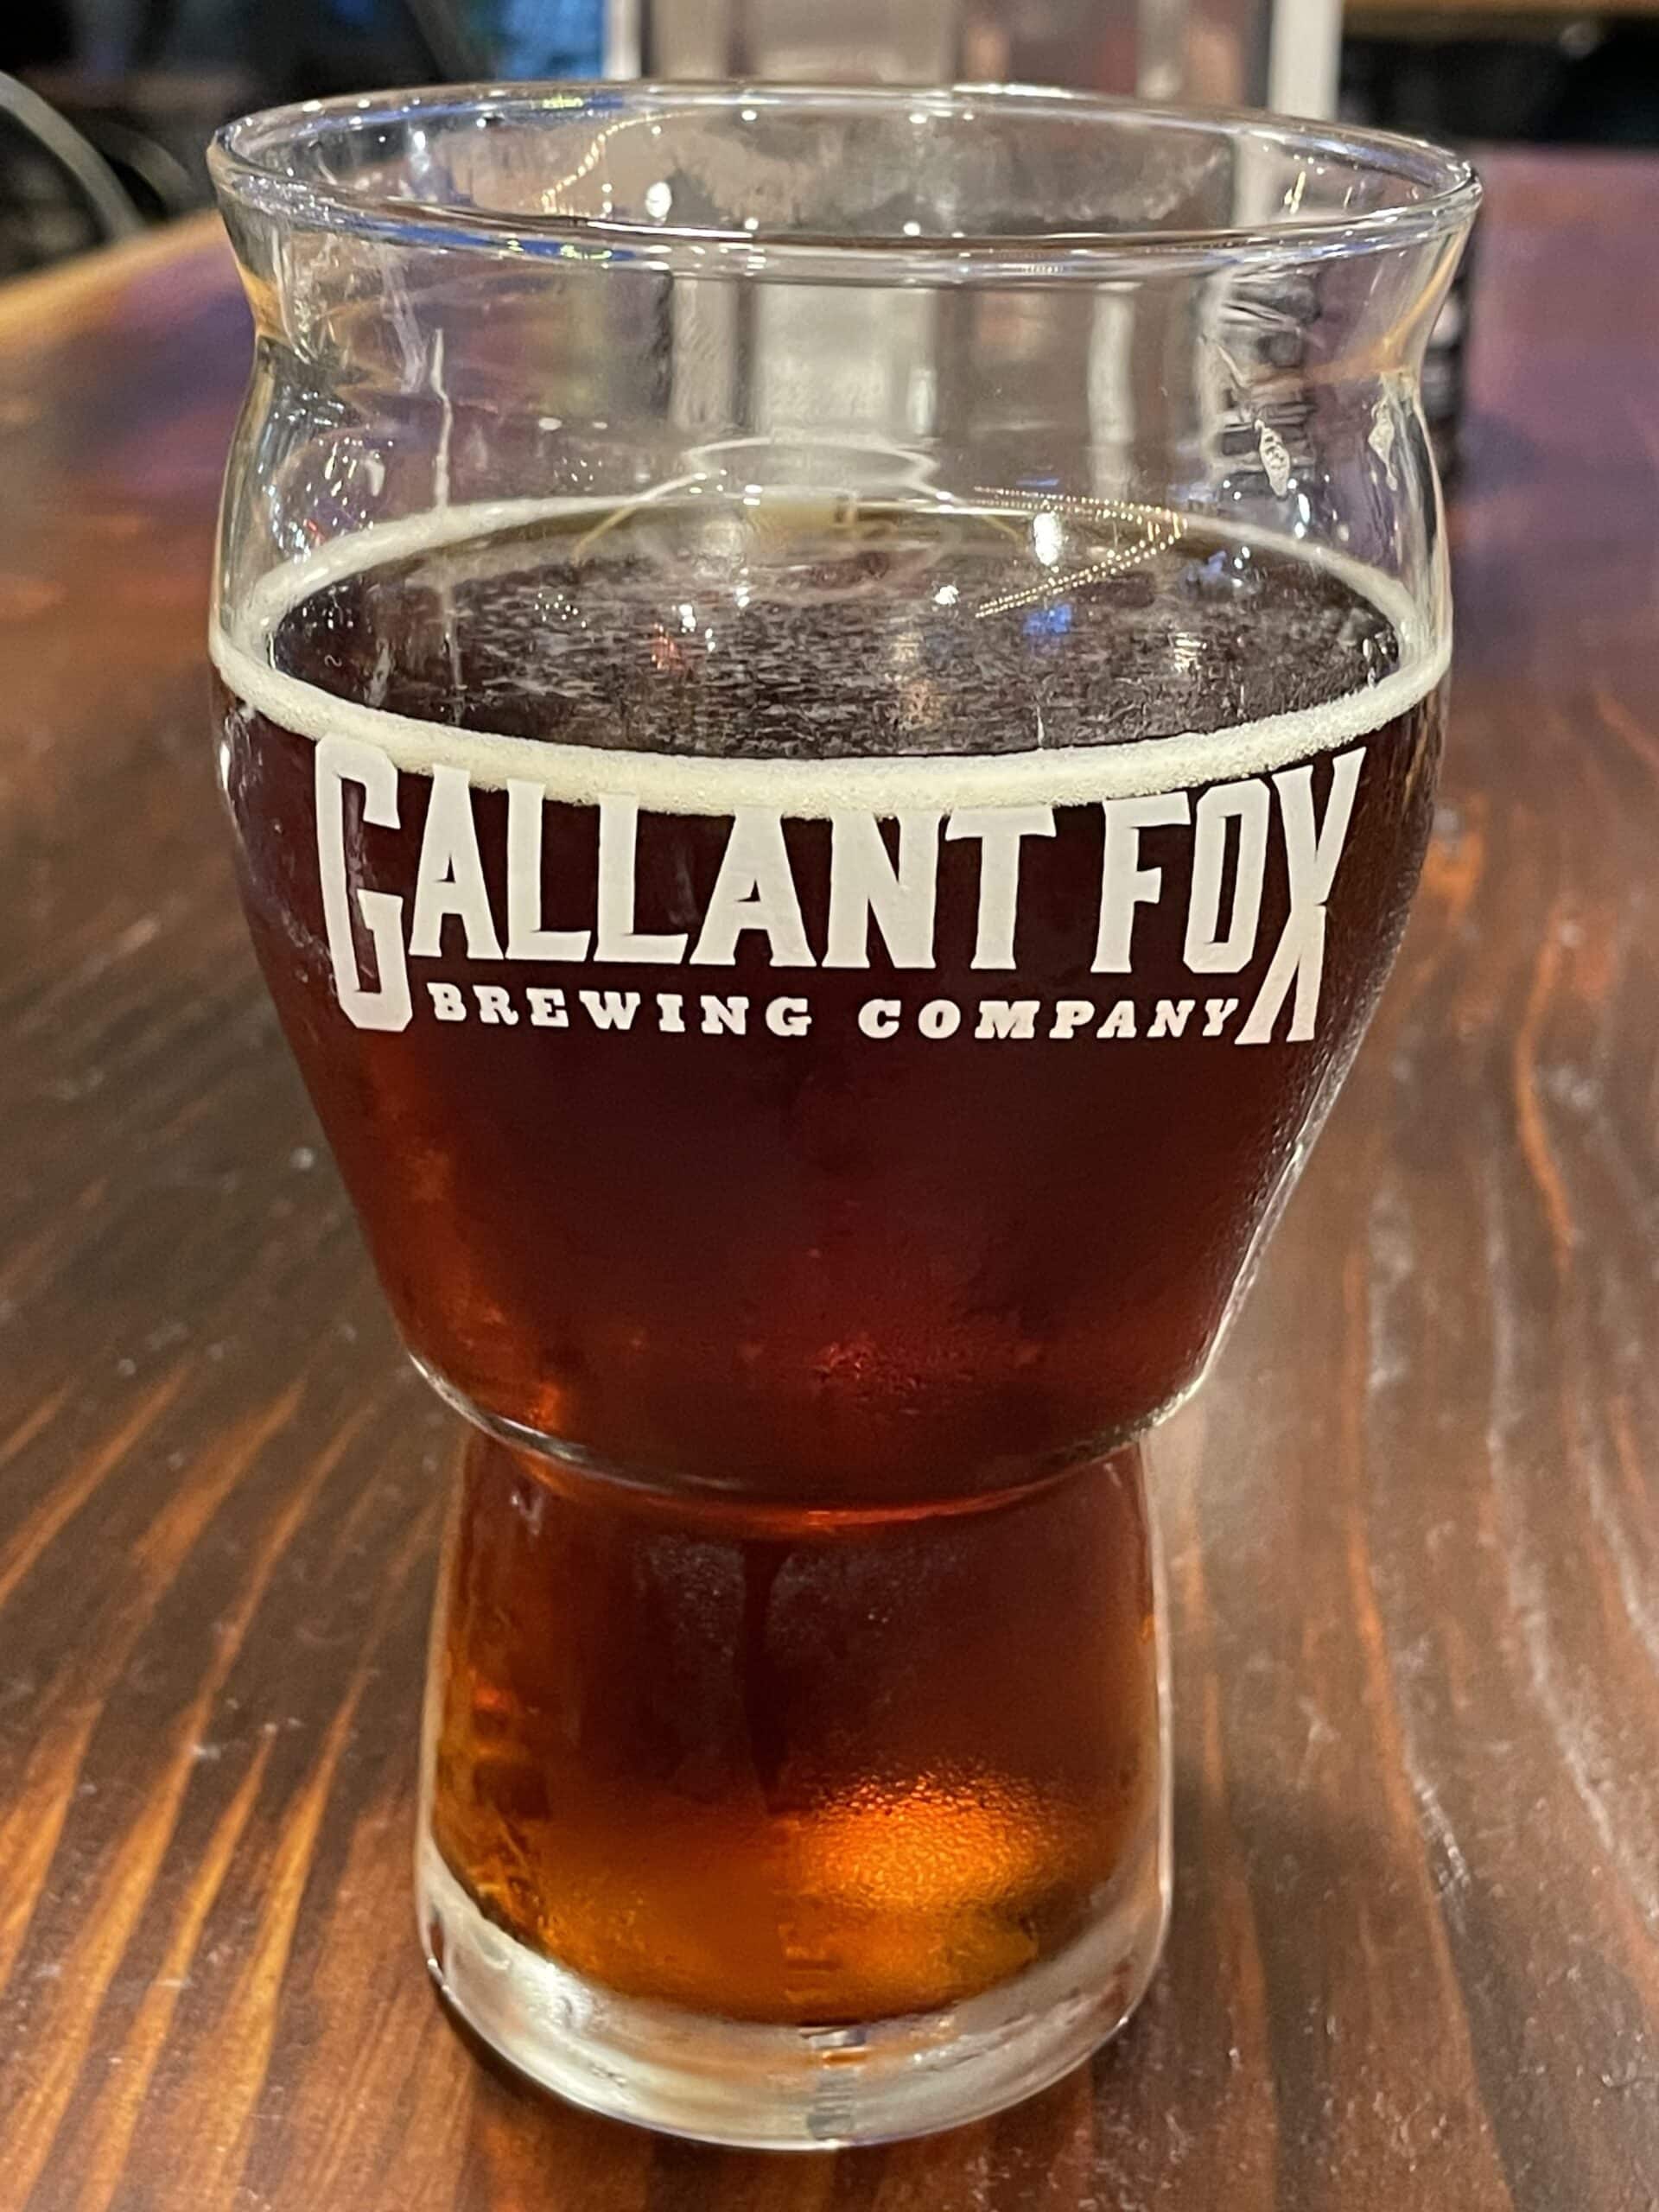 Pint of Beer at the Gallant Fox Brewing Company